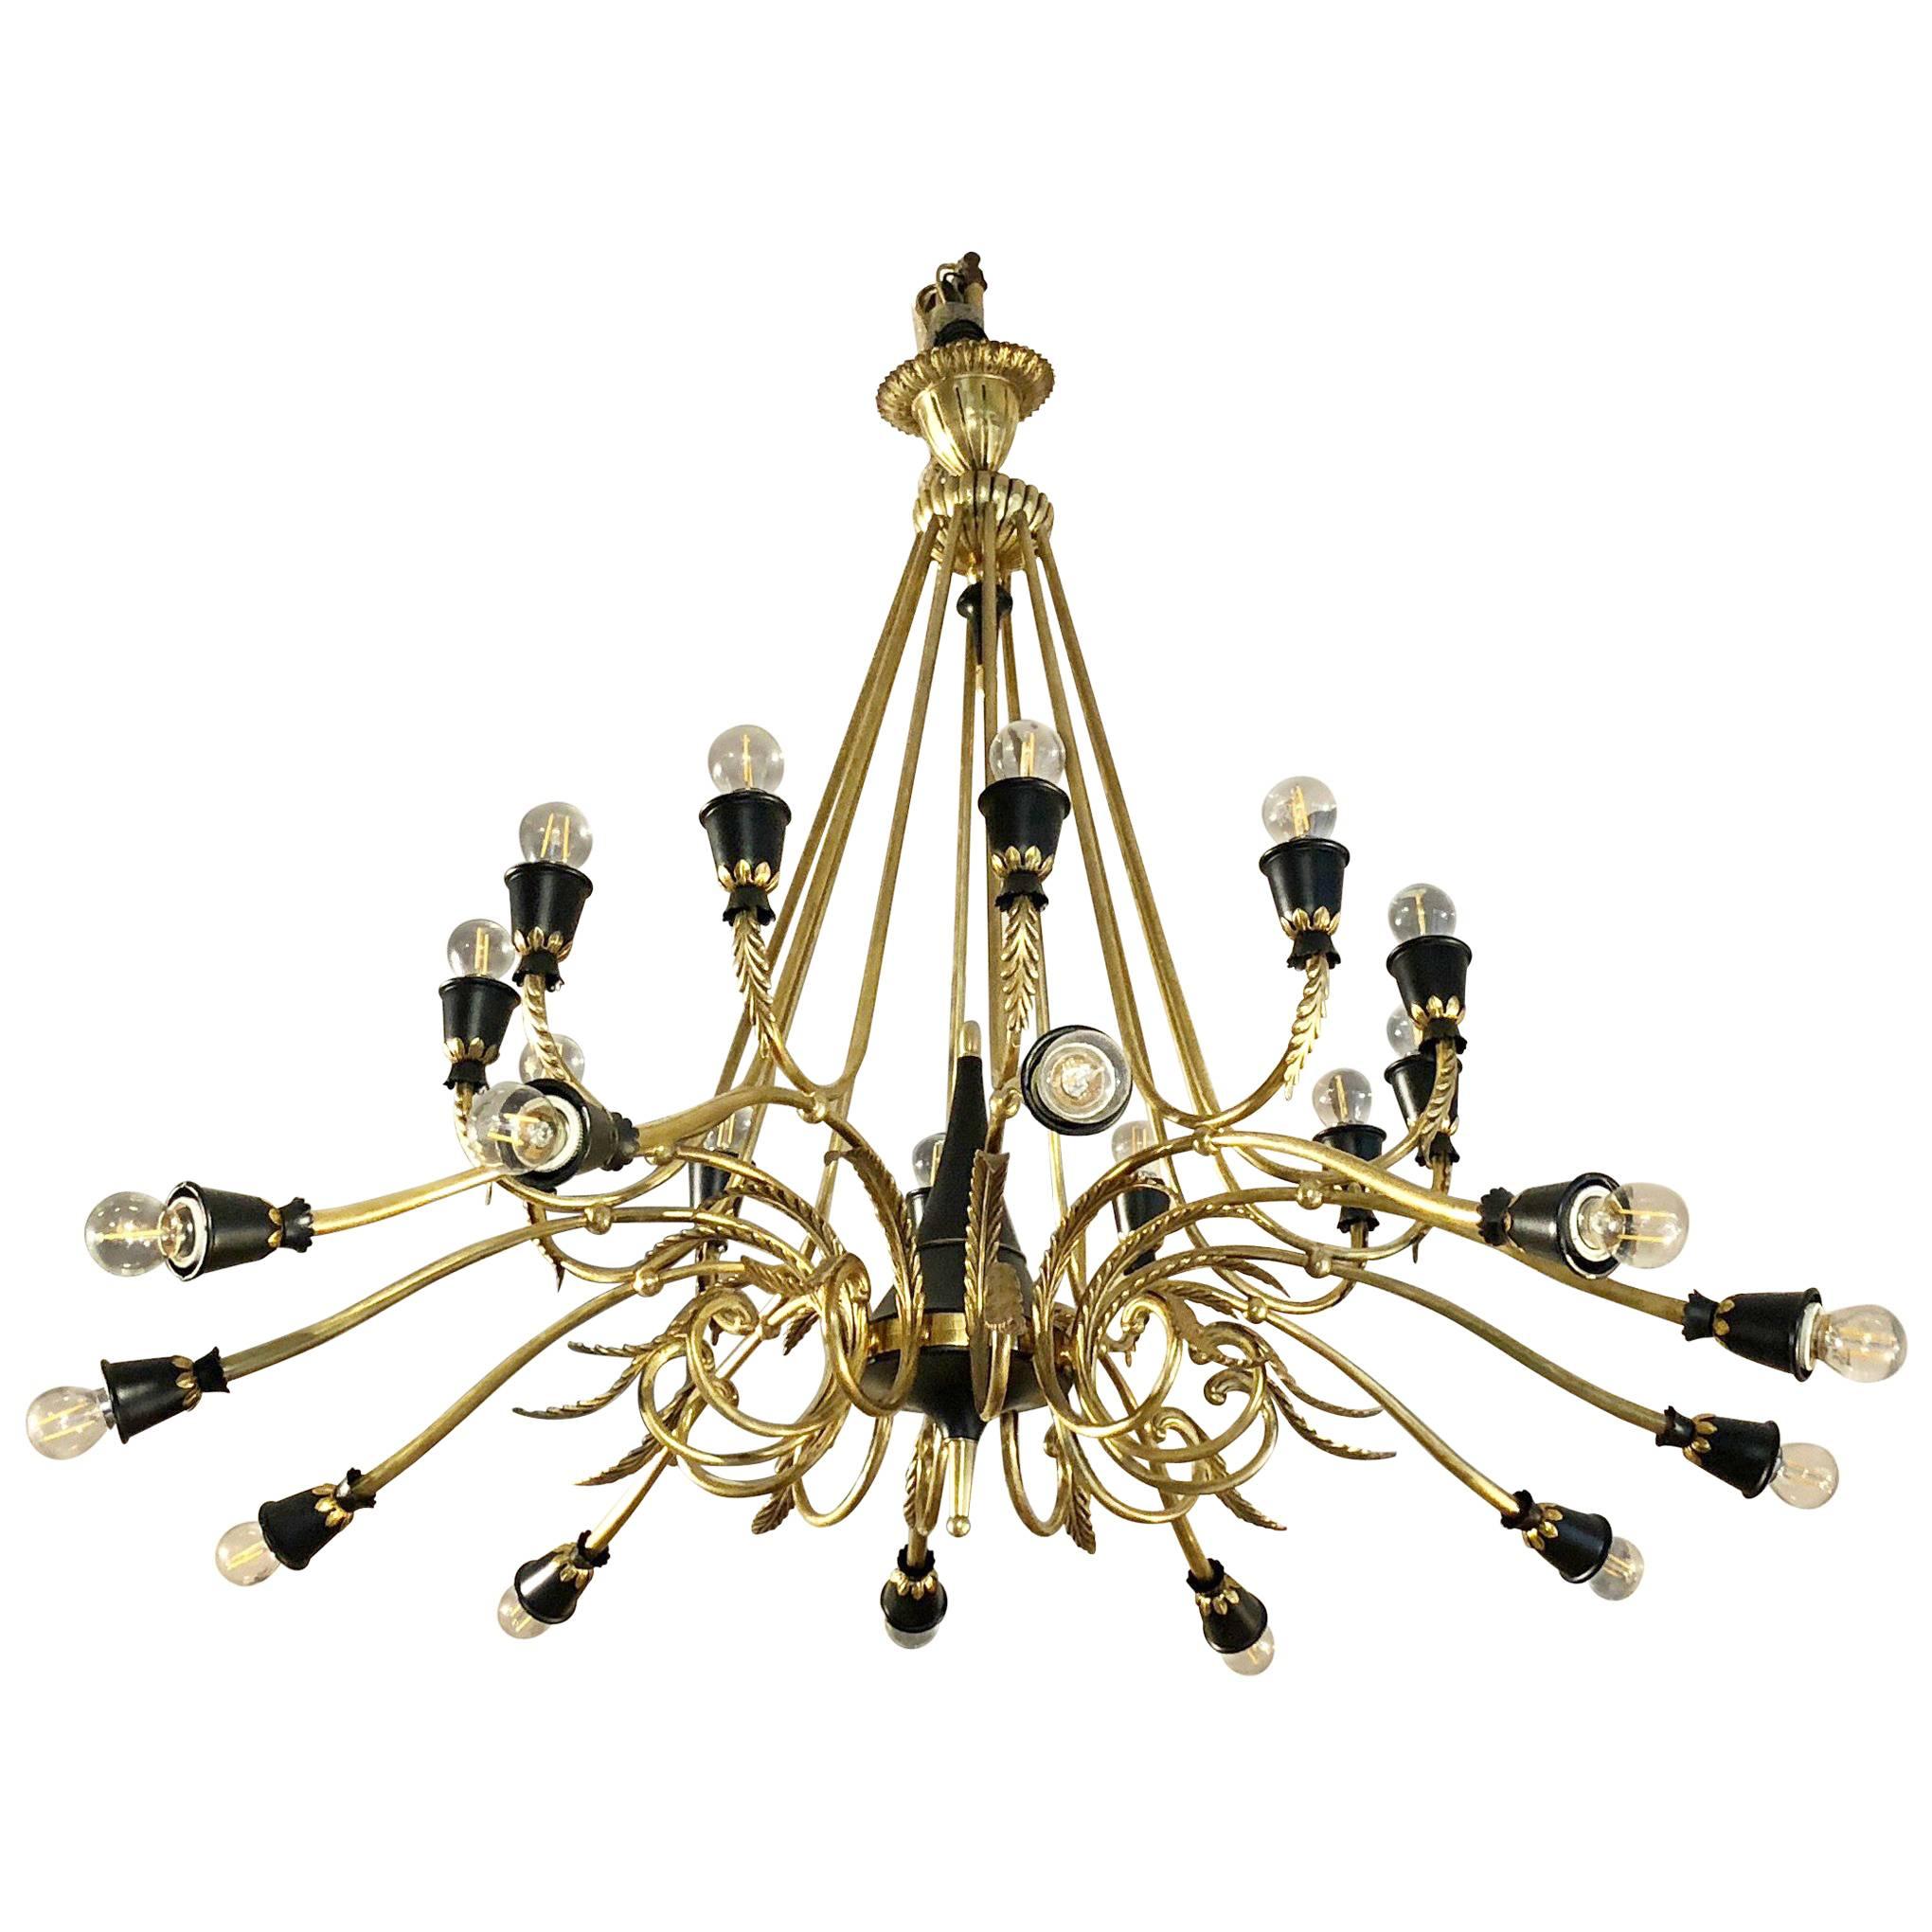 1950s Italian Empire Style Brass and Black Lacquer Chandelier